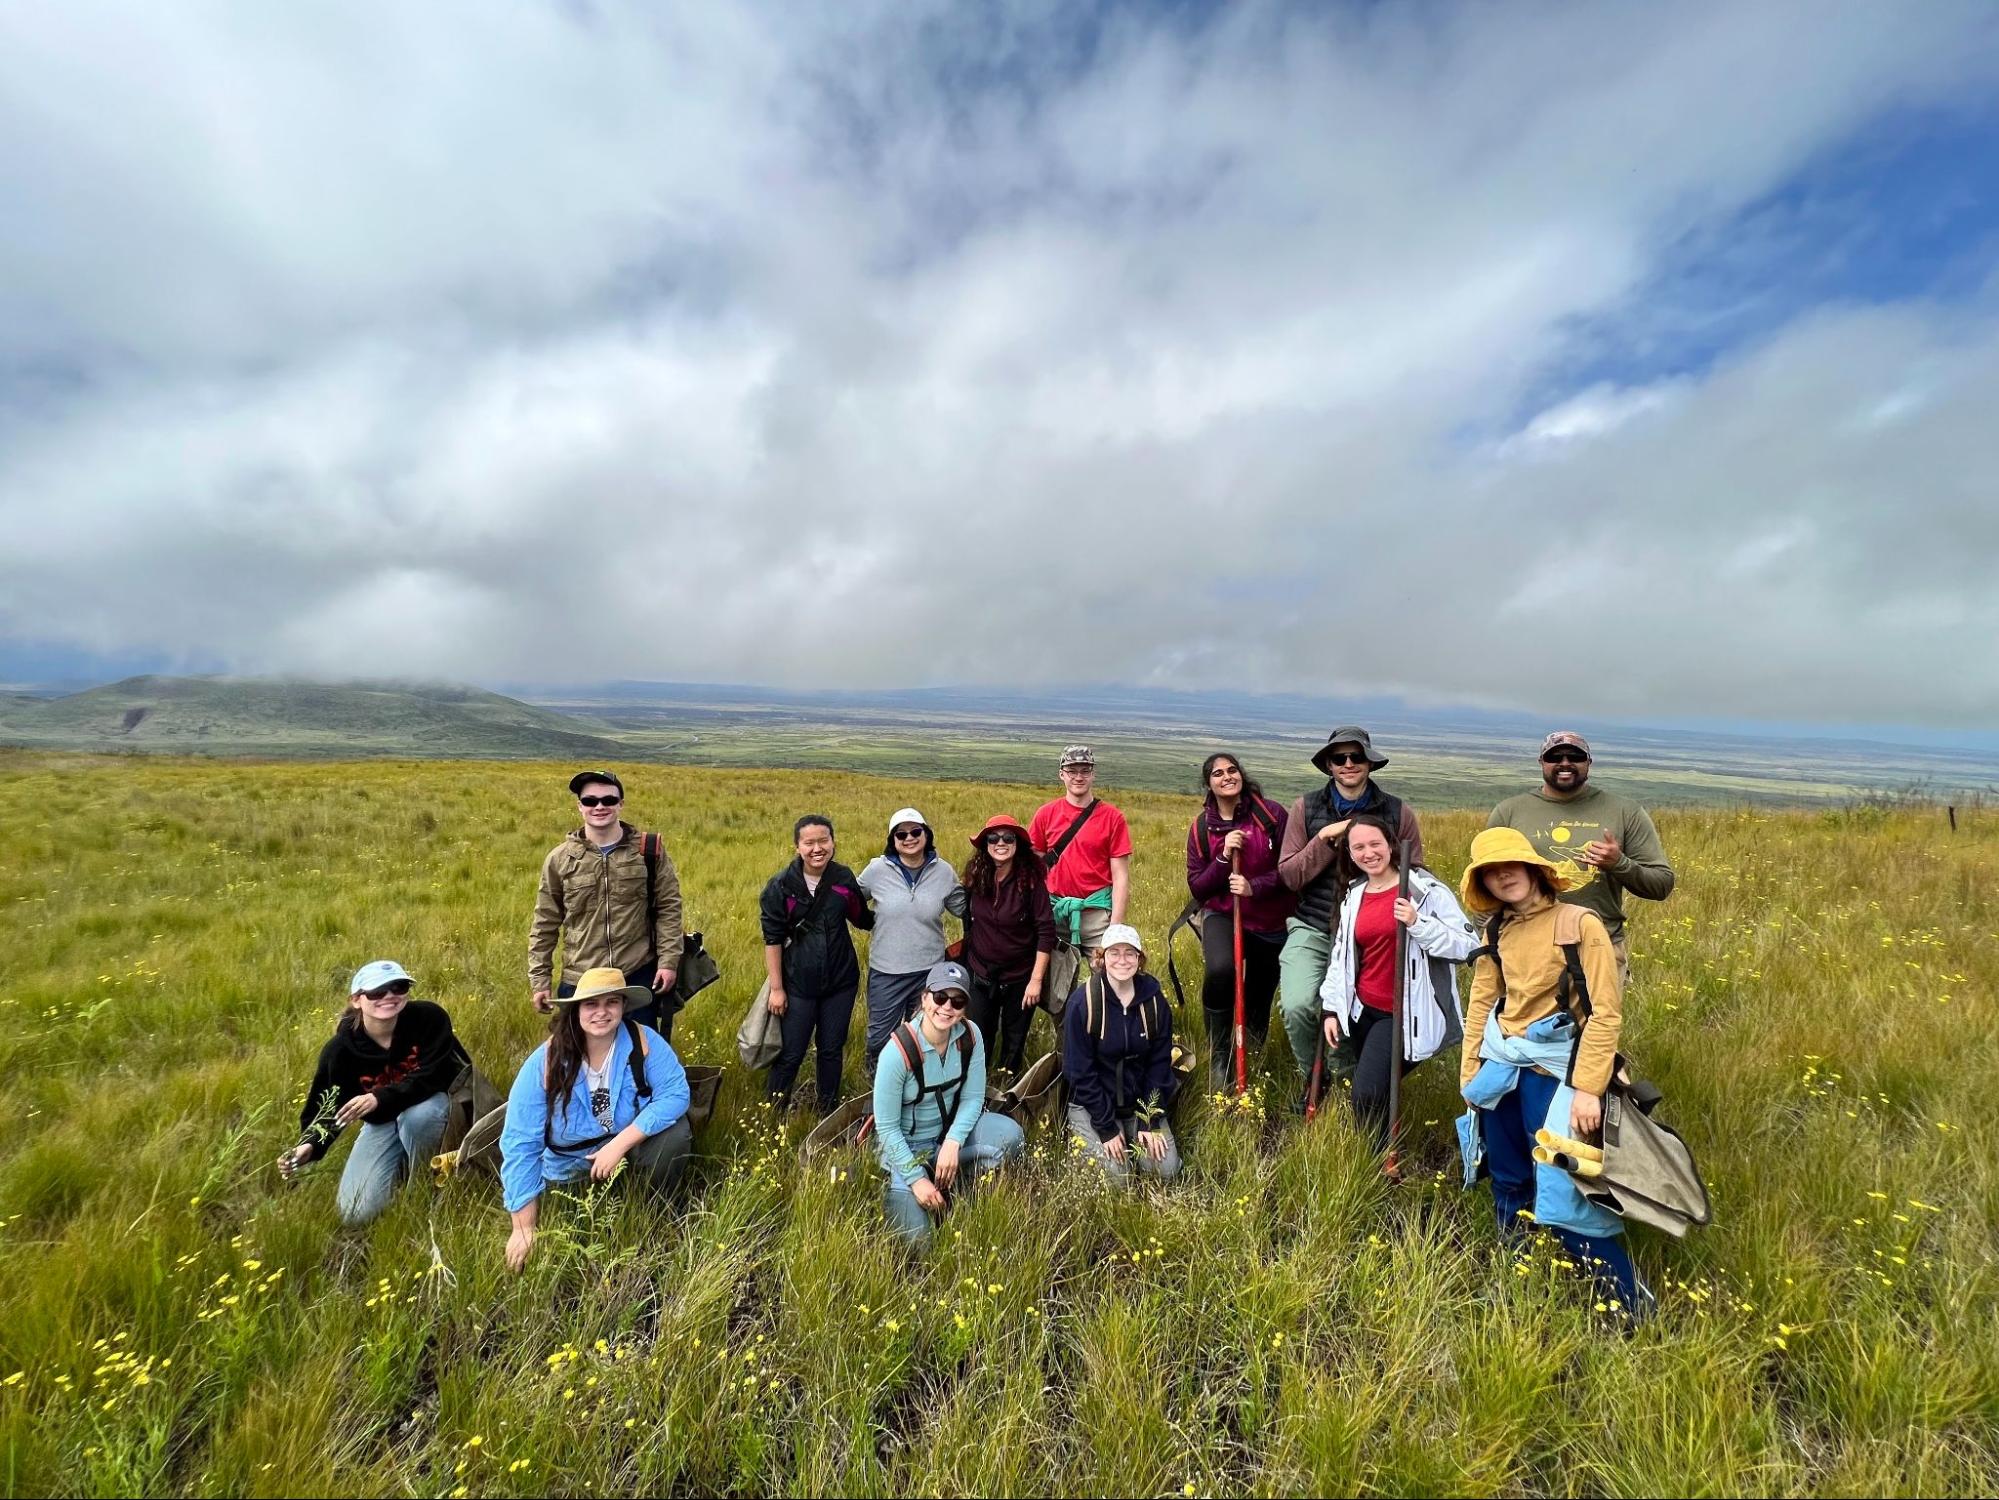 Caltech Y ASB group behind 2 of 400 newly planted native trees to help support the endemic and endangered Palila bird population